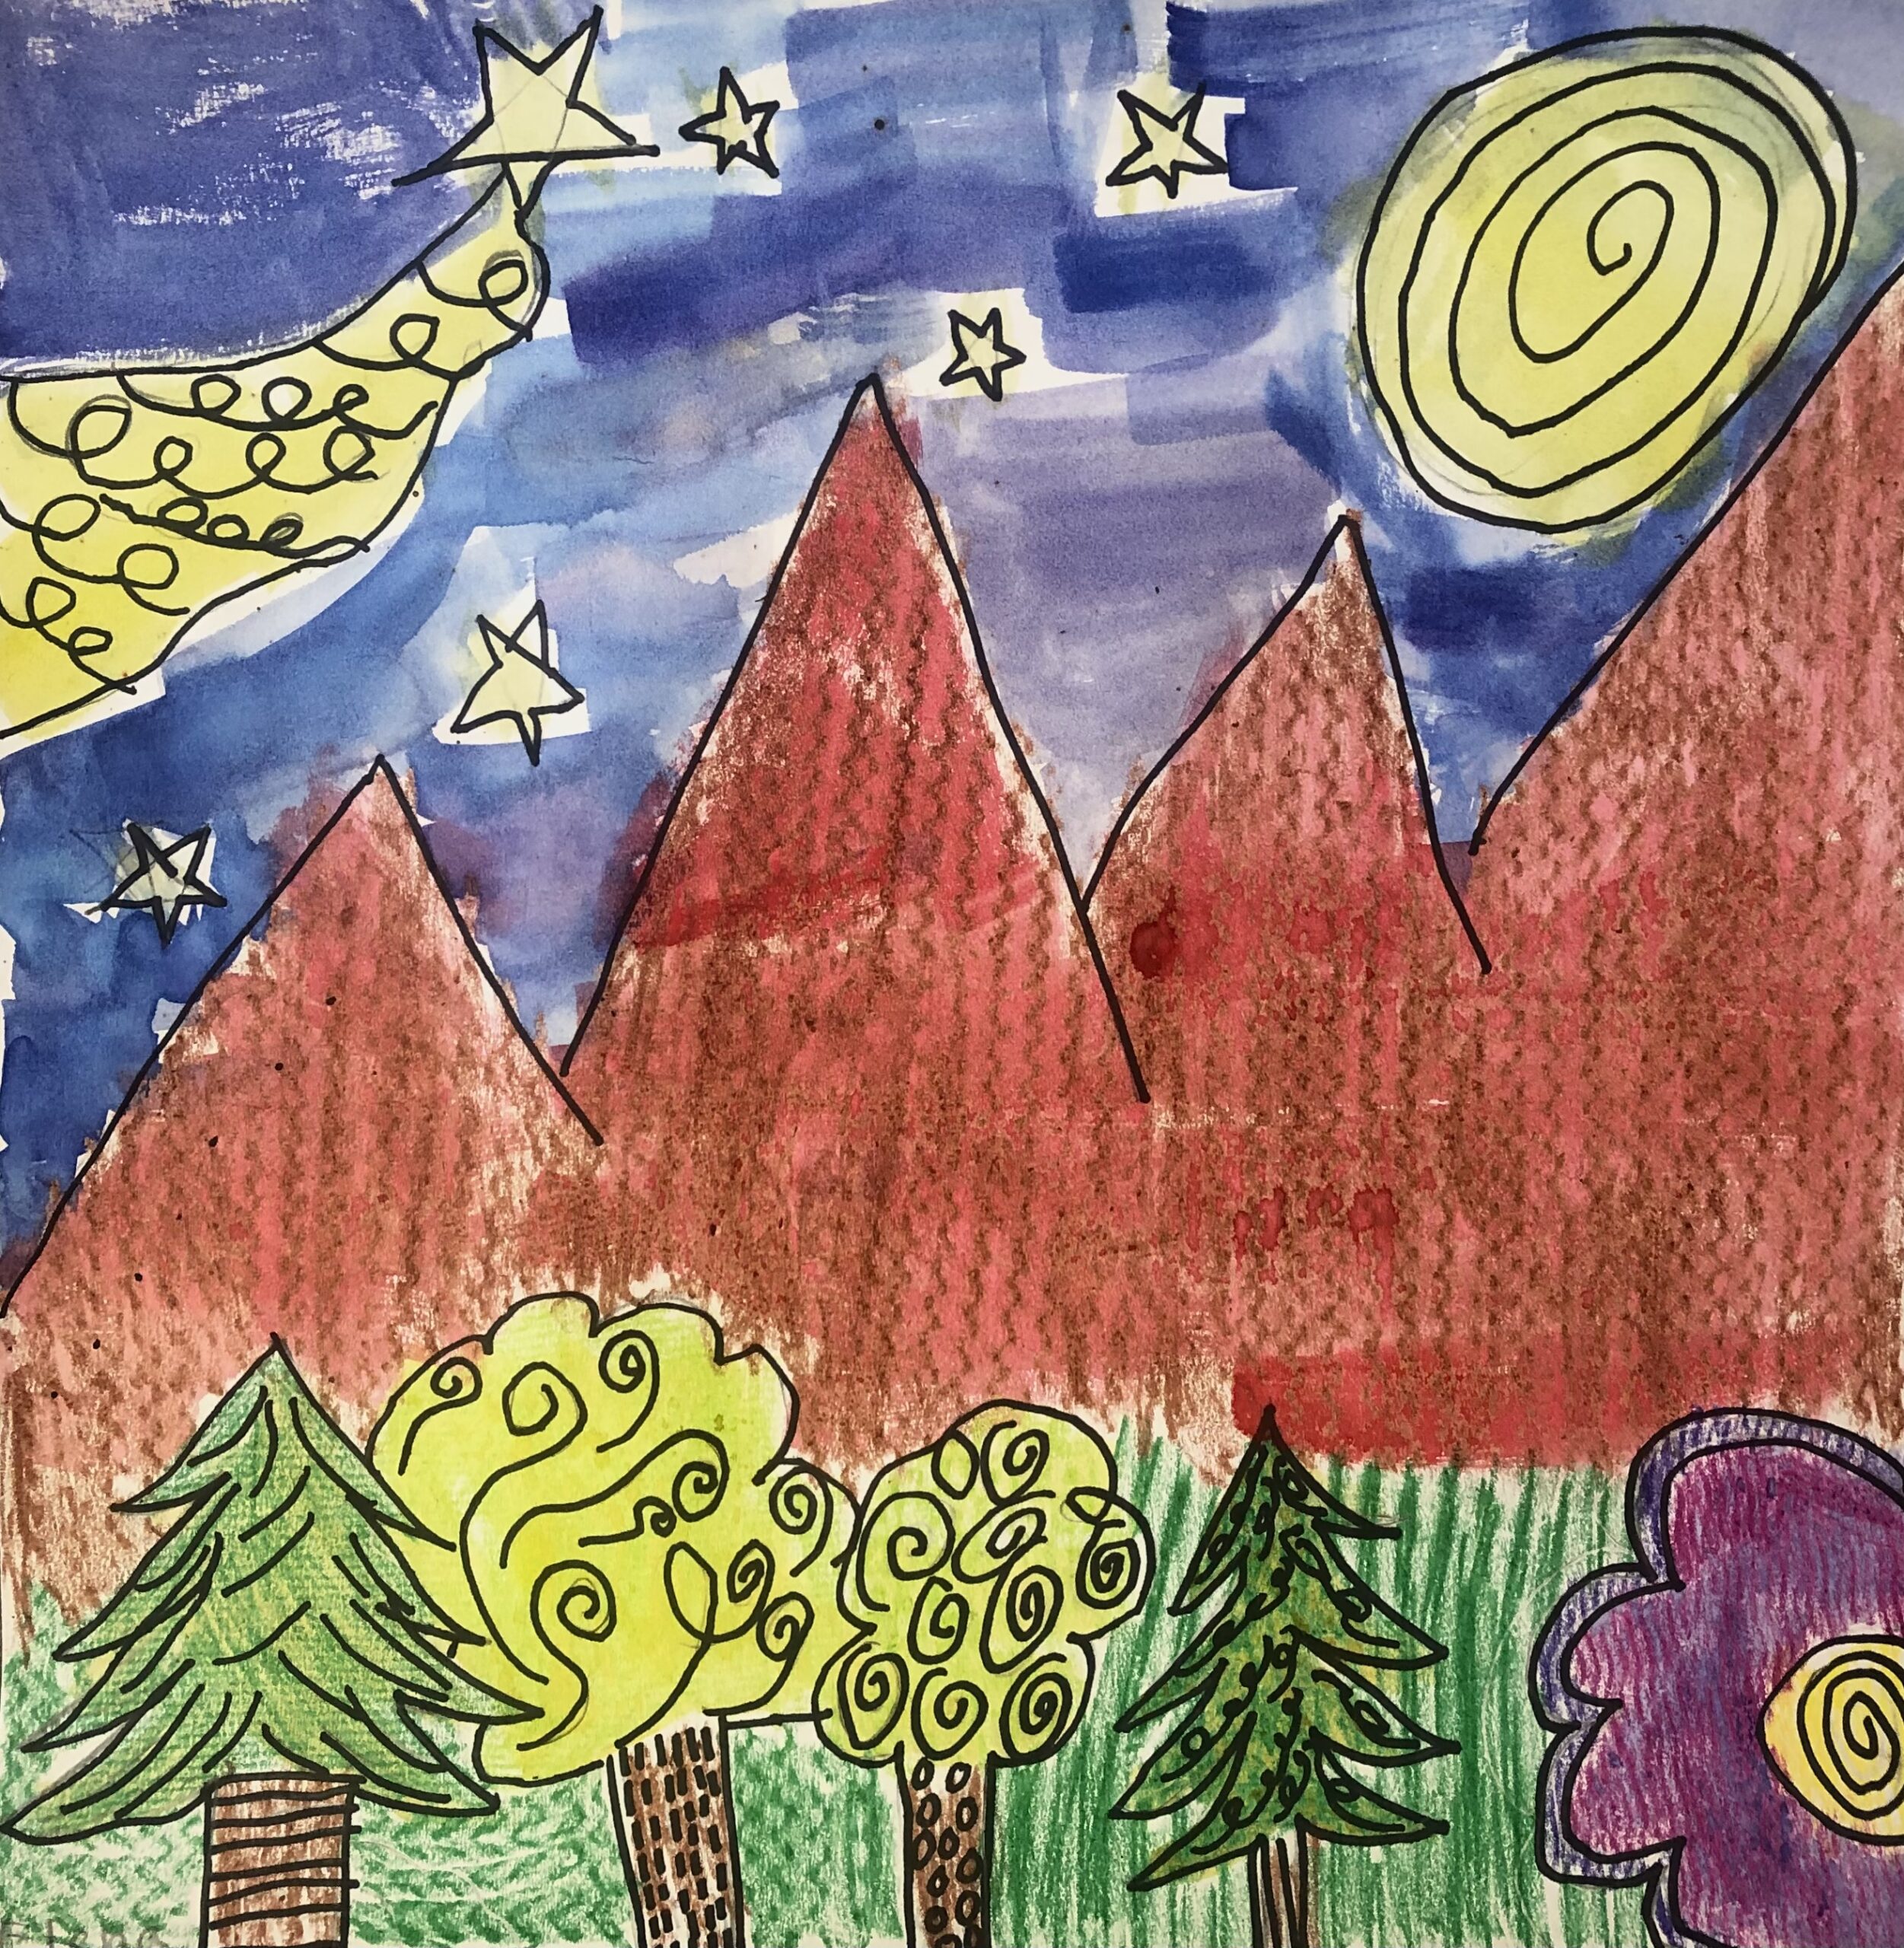 prize winning artworks from science day children's painting contest